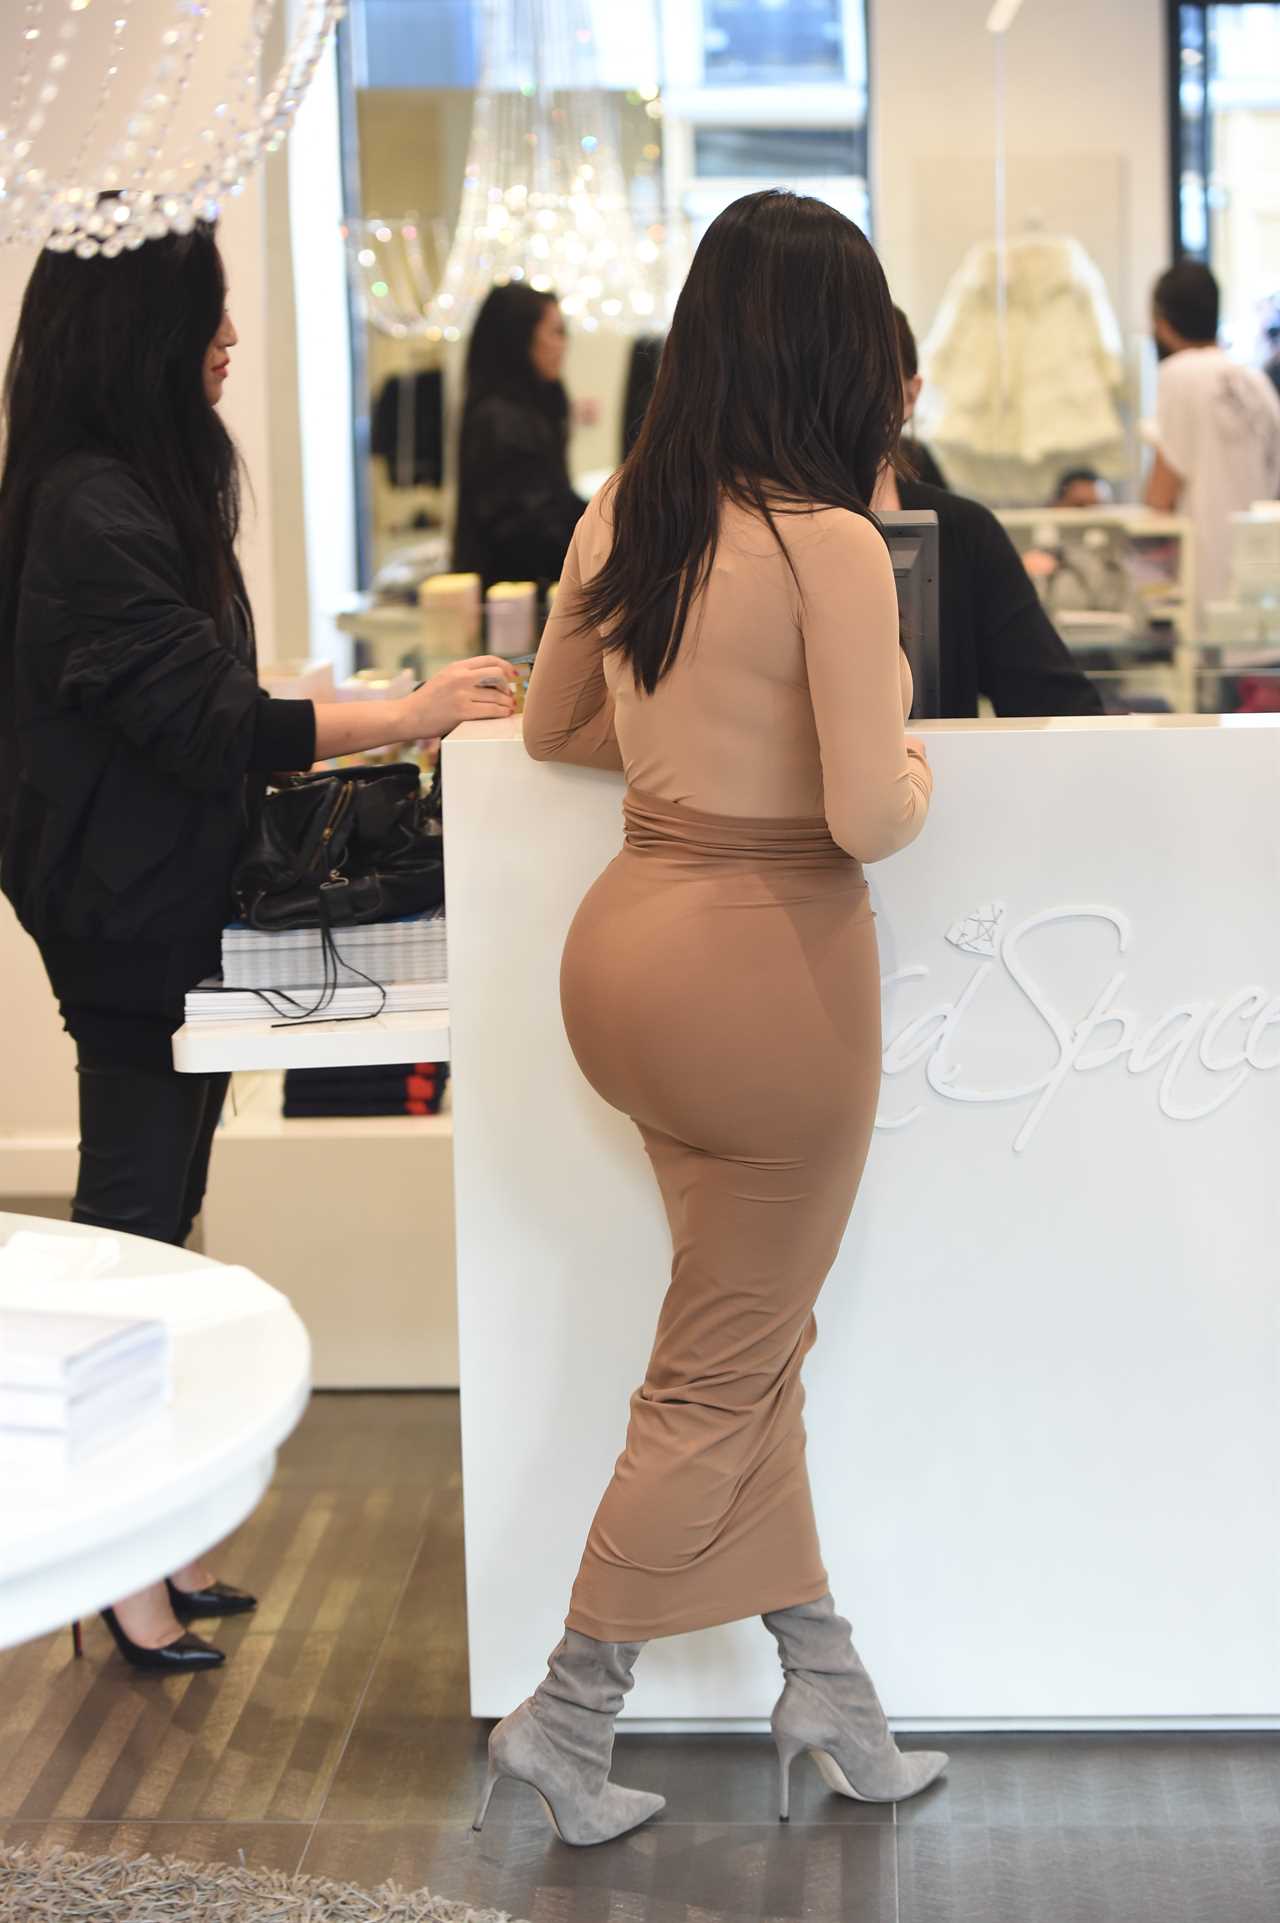 Kardashian fans are concerned after Kim’s butt completely disappears in startling new photo after drastic weight loss